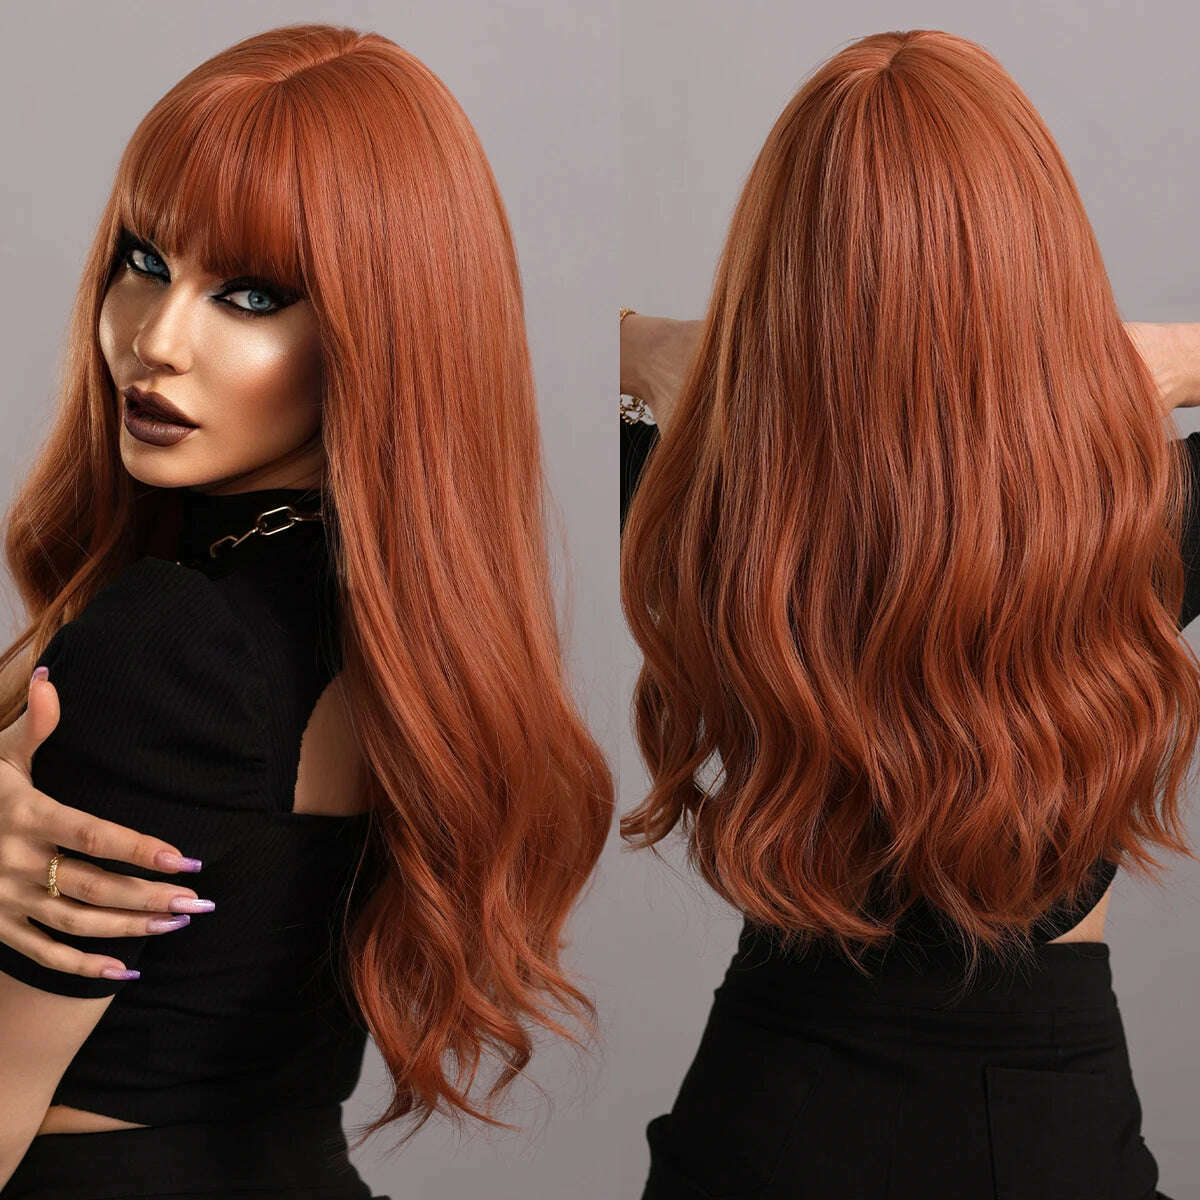 KIMLUD, NAMM Long Wavy Ombre Blonde Wigs for Women Cosplay Daily Party Synthetic Light Orange Hair Wig Lolita Heat Resistant Fiber, MW0351-1 / Follow us - 2USD, KIMLUD Womens Clothes